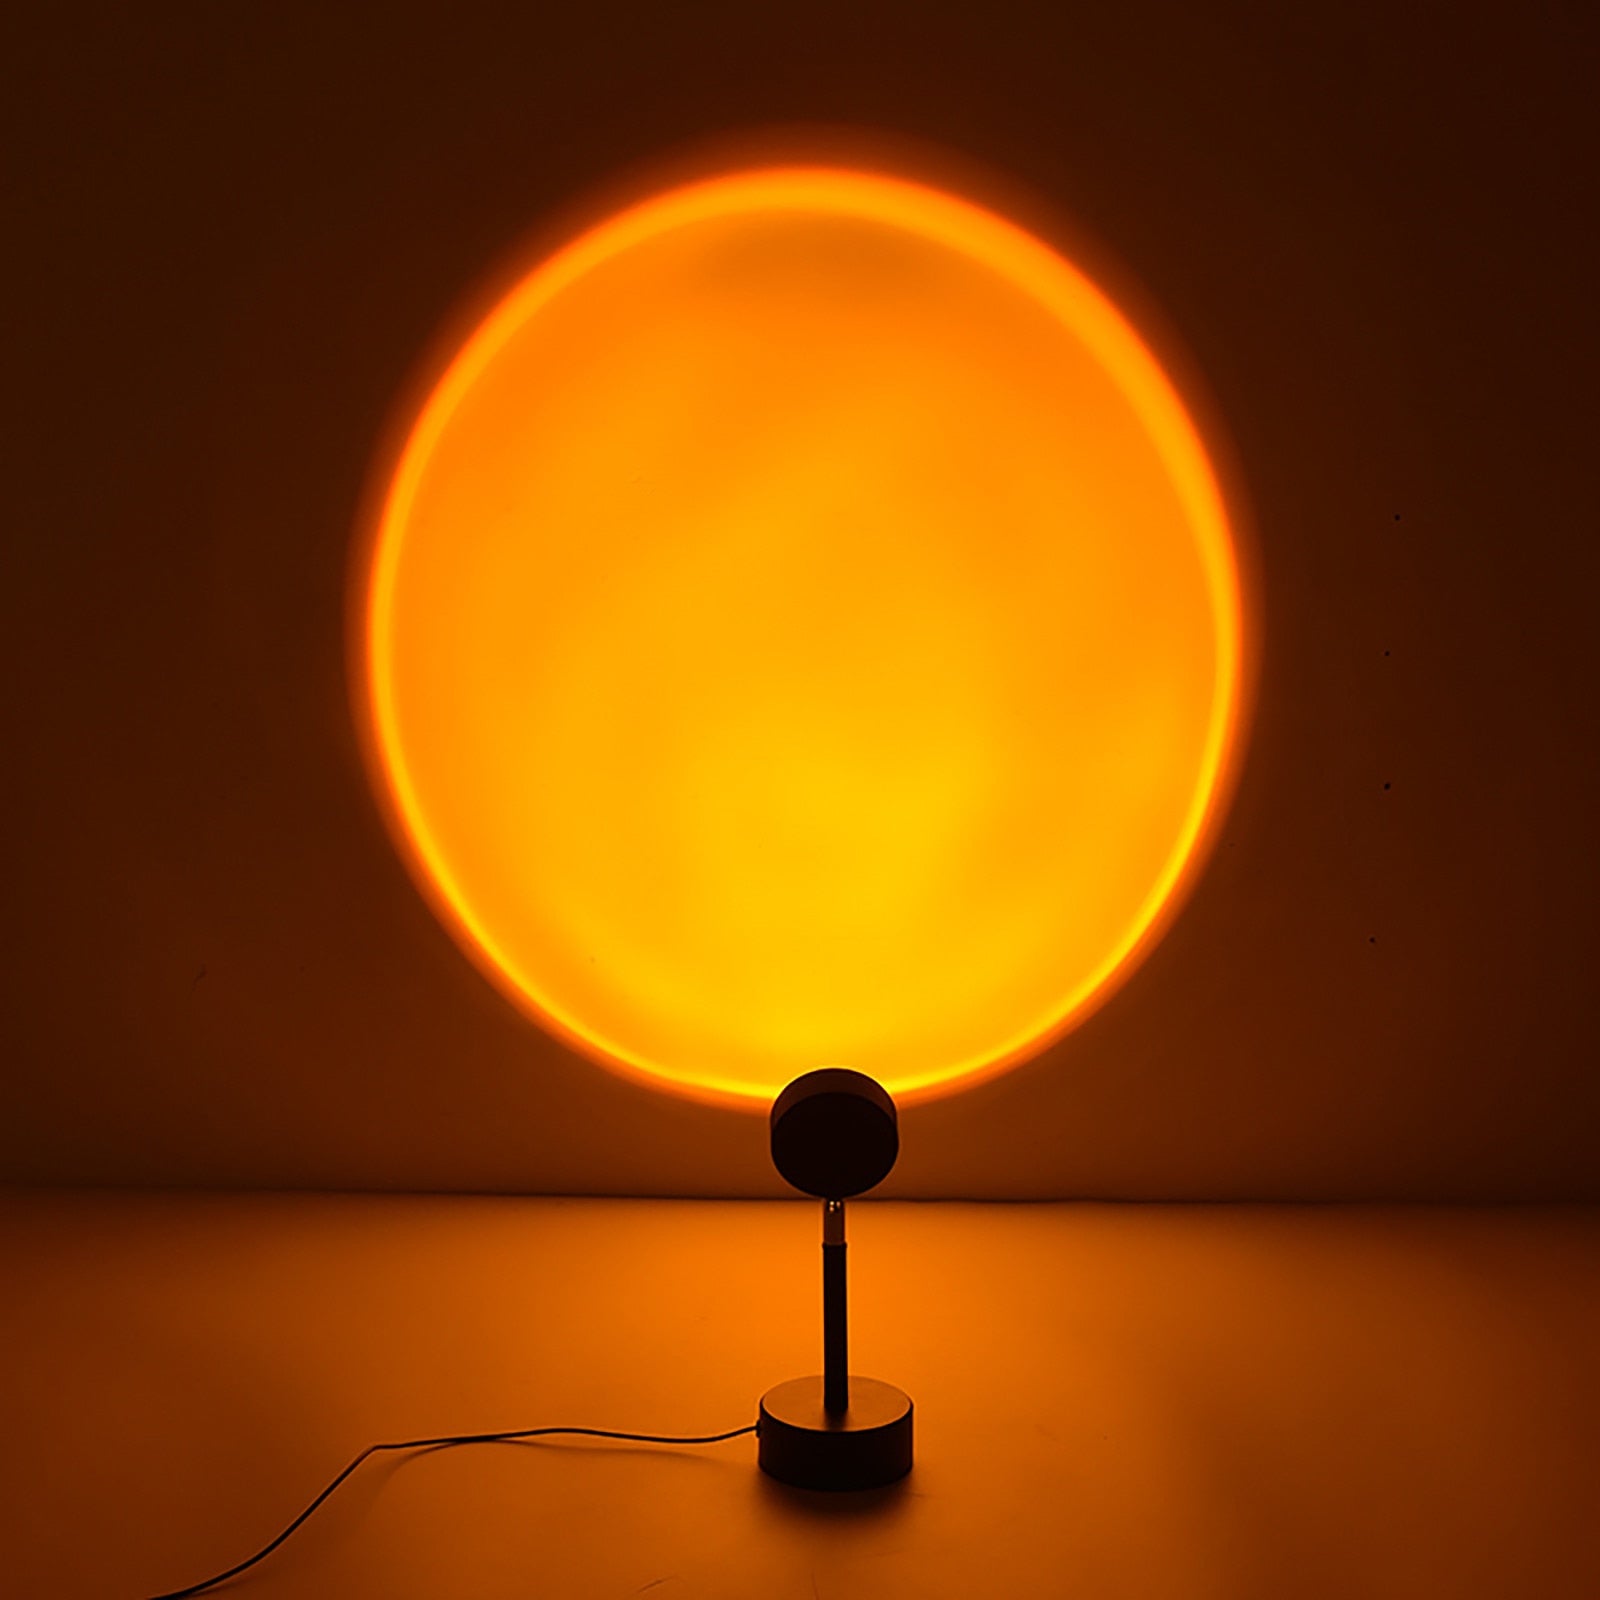 yellow-to-orange gradient light circle on a wall, resembling a sunset, ideal for creating a warm, cozy atmosphere in a room.